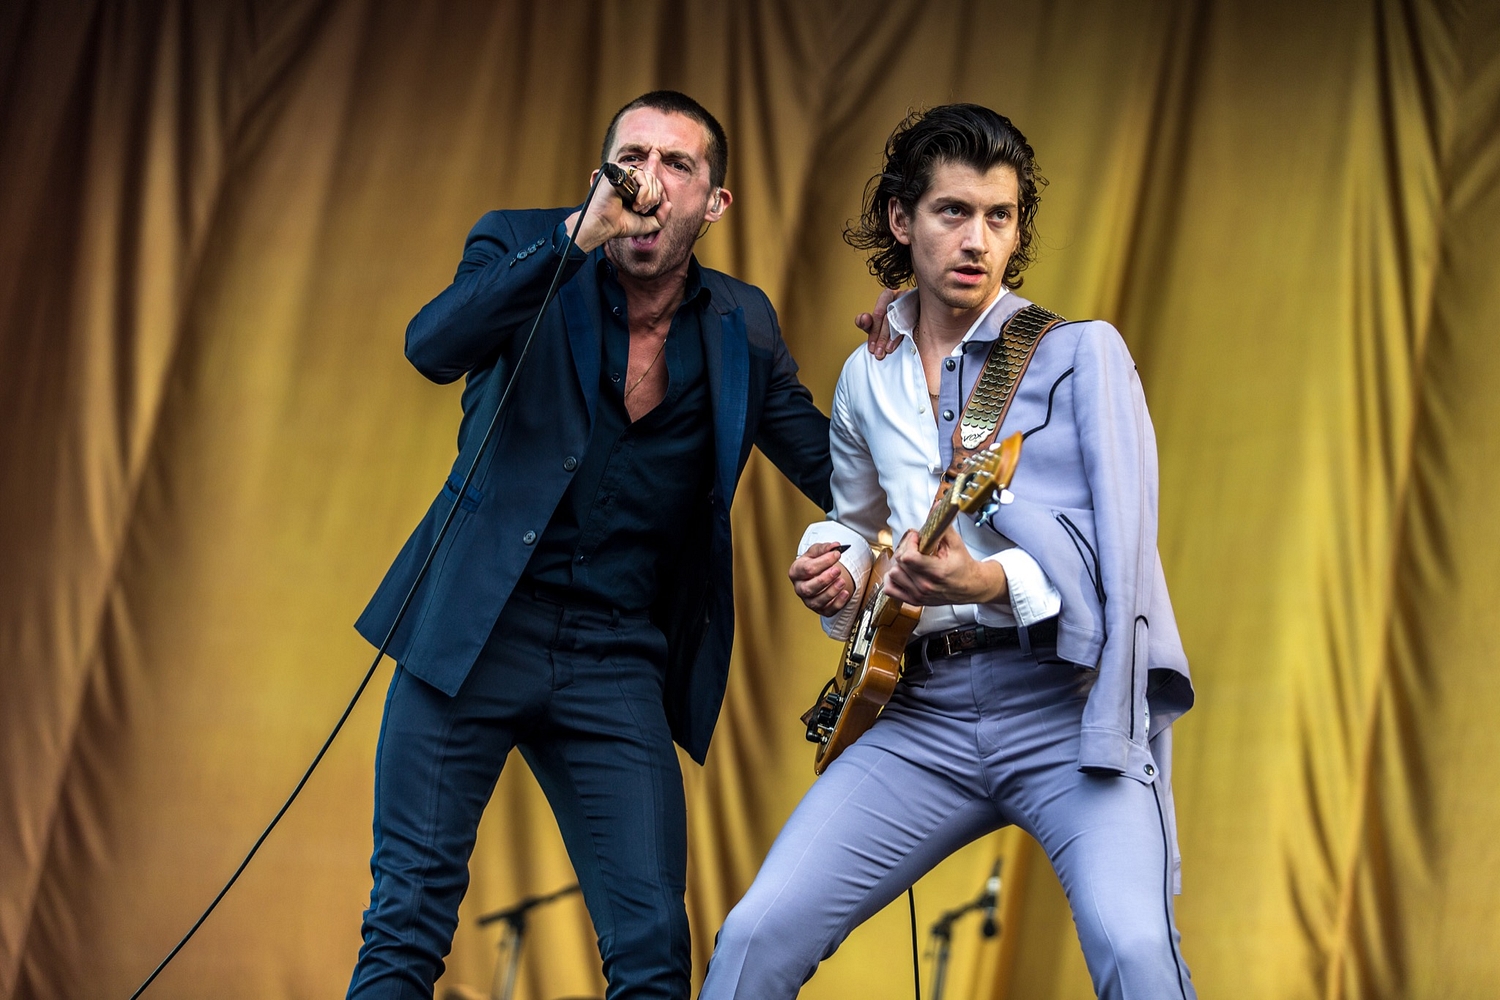 The Last Shadow Puppets make up another song - this one’s about LCD Soundsystem